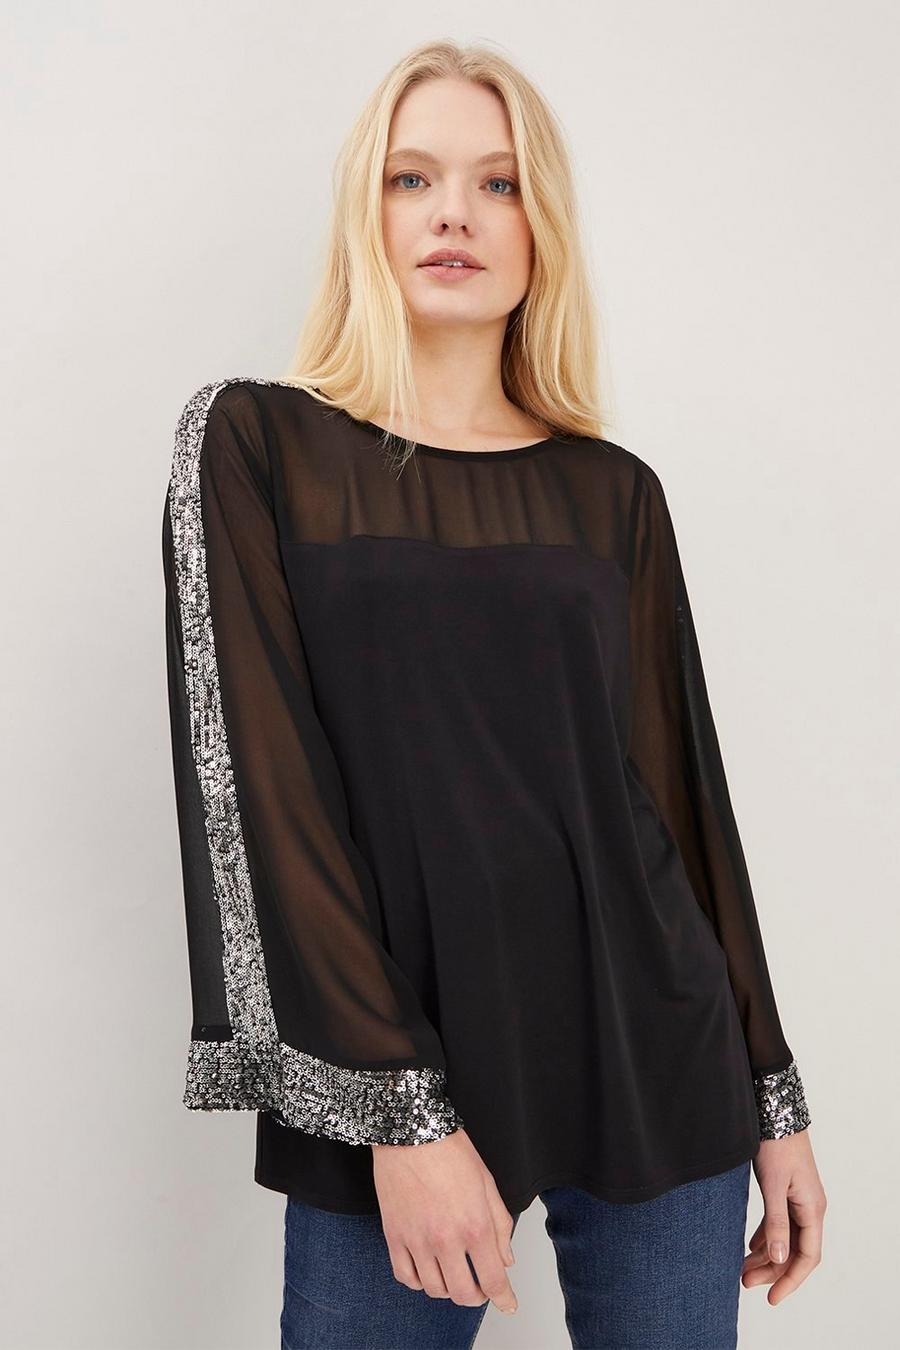 Silver Trim Chiffon Sleeve Party Top